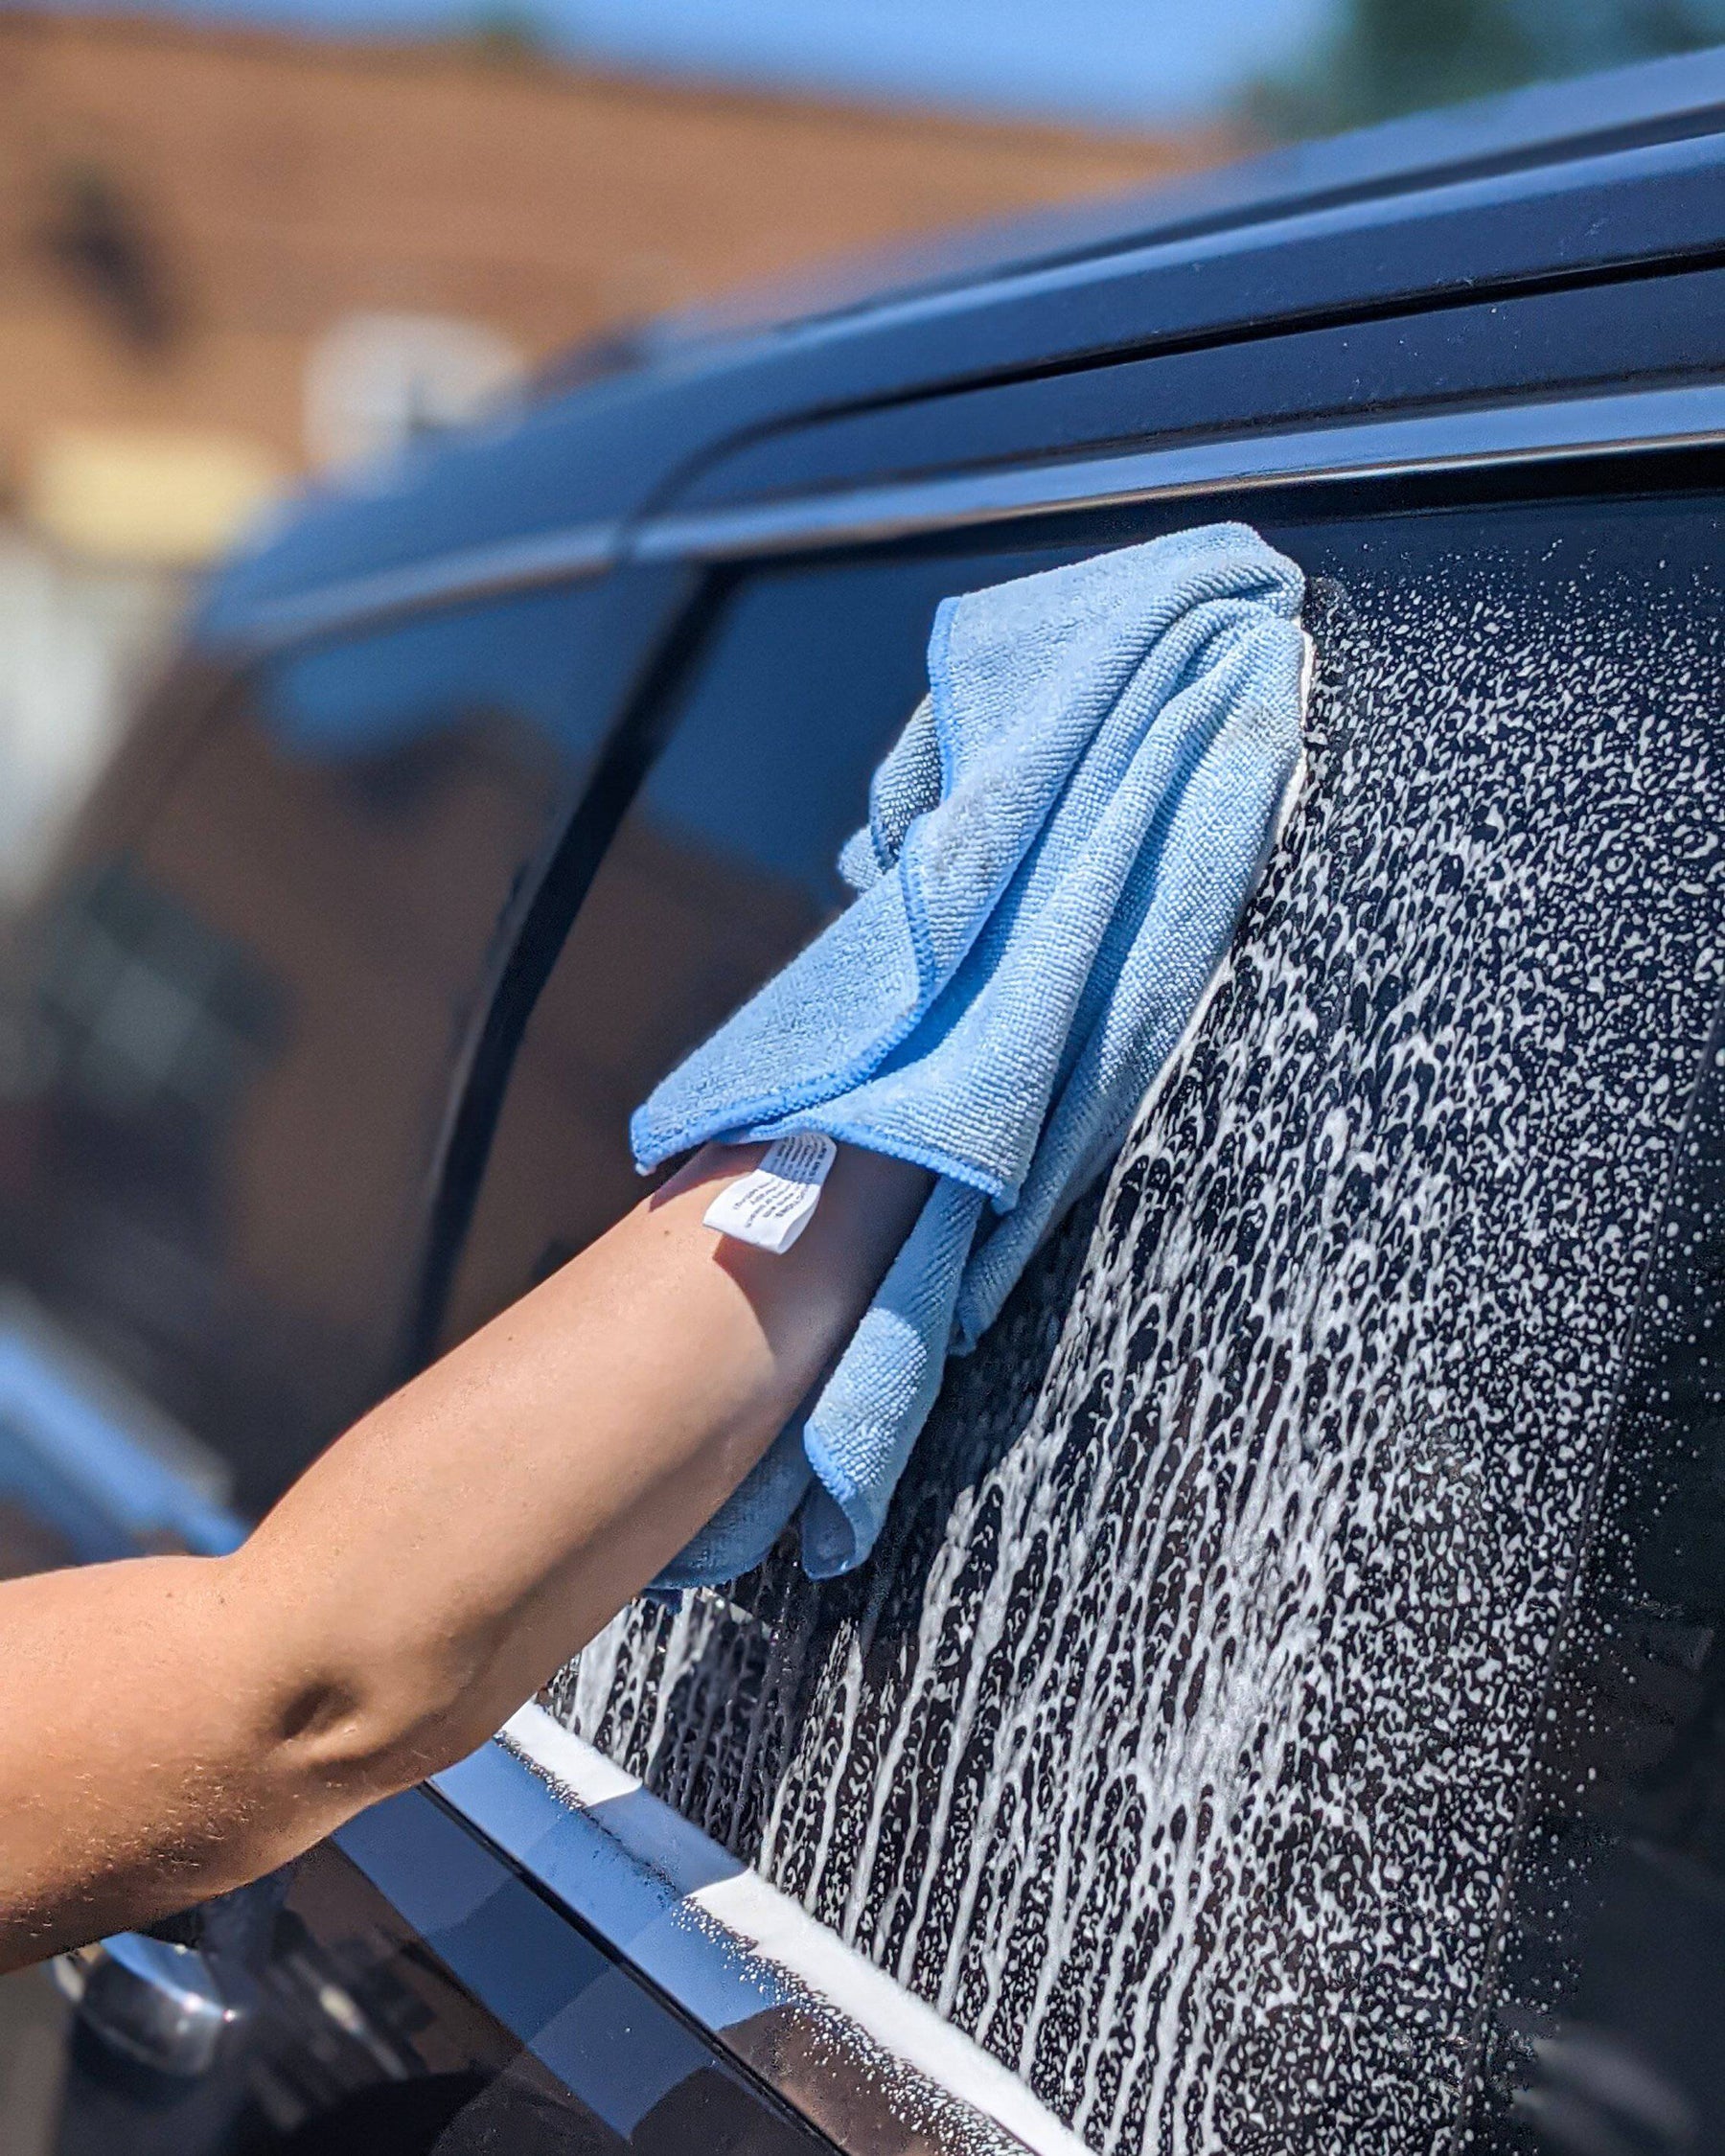 BLYSK Premium Microfiber Towels for Household Cleaning and Car Detailing - Maazzo